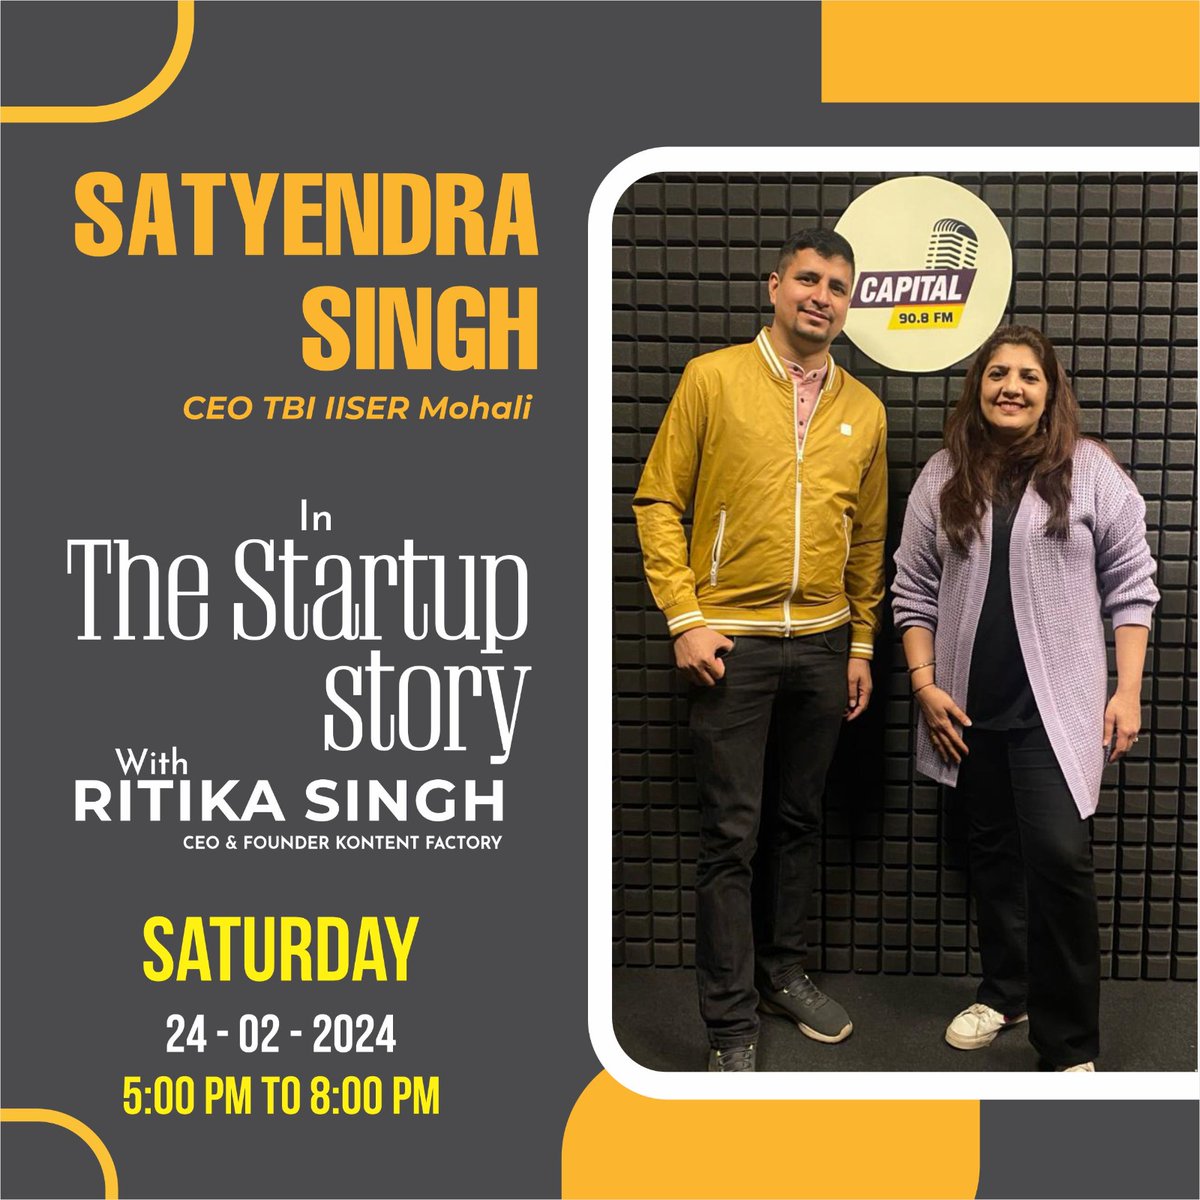 Tune into Capital 90.8 FM this Saturday, 24th February, from 5 PM to 8 PM, to hear Mr. @Satyendra_15, CEO of TBI IISER Mohali, on 'The Startup Story'. Hosted by @ritikasingh75, CEO & Founder of @kontent_factory. 🎙️Don’t miss out on stories that could spark your next big idea! 💡